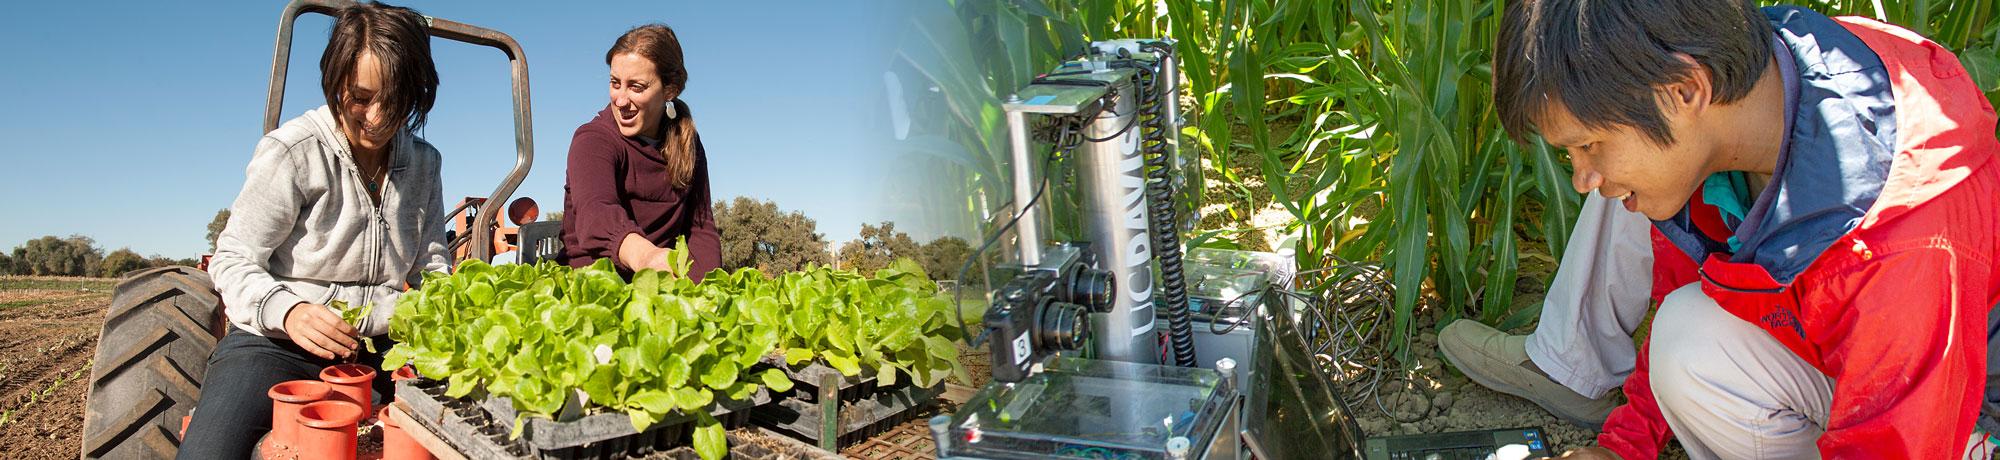 The new Agricultural Technology program of UC Davis Smart Farm will prepare students for the new farming technology and smart farming practices for the future of food and teach sustainable agriculture methods.